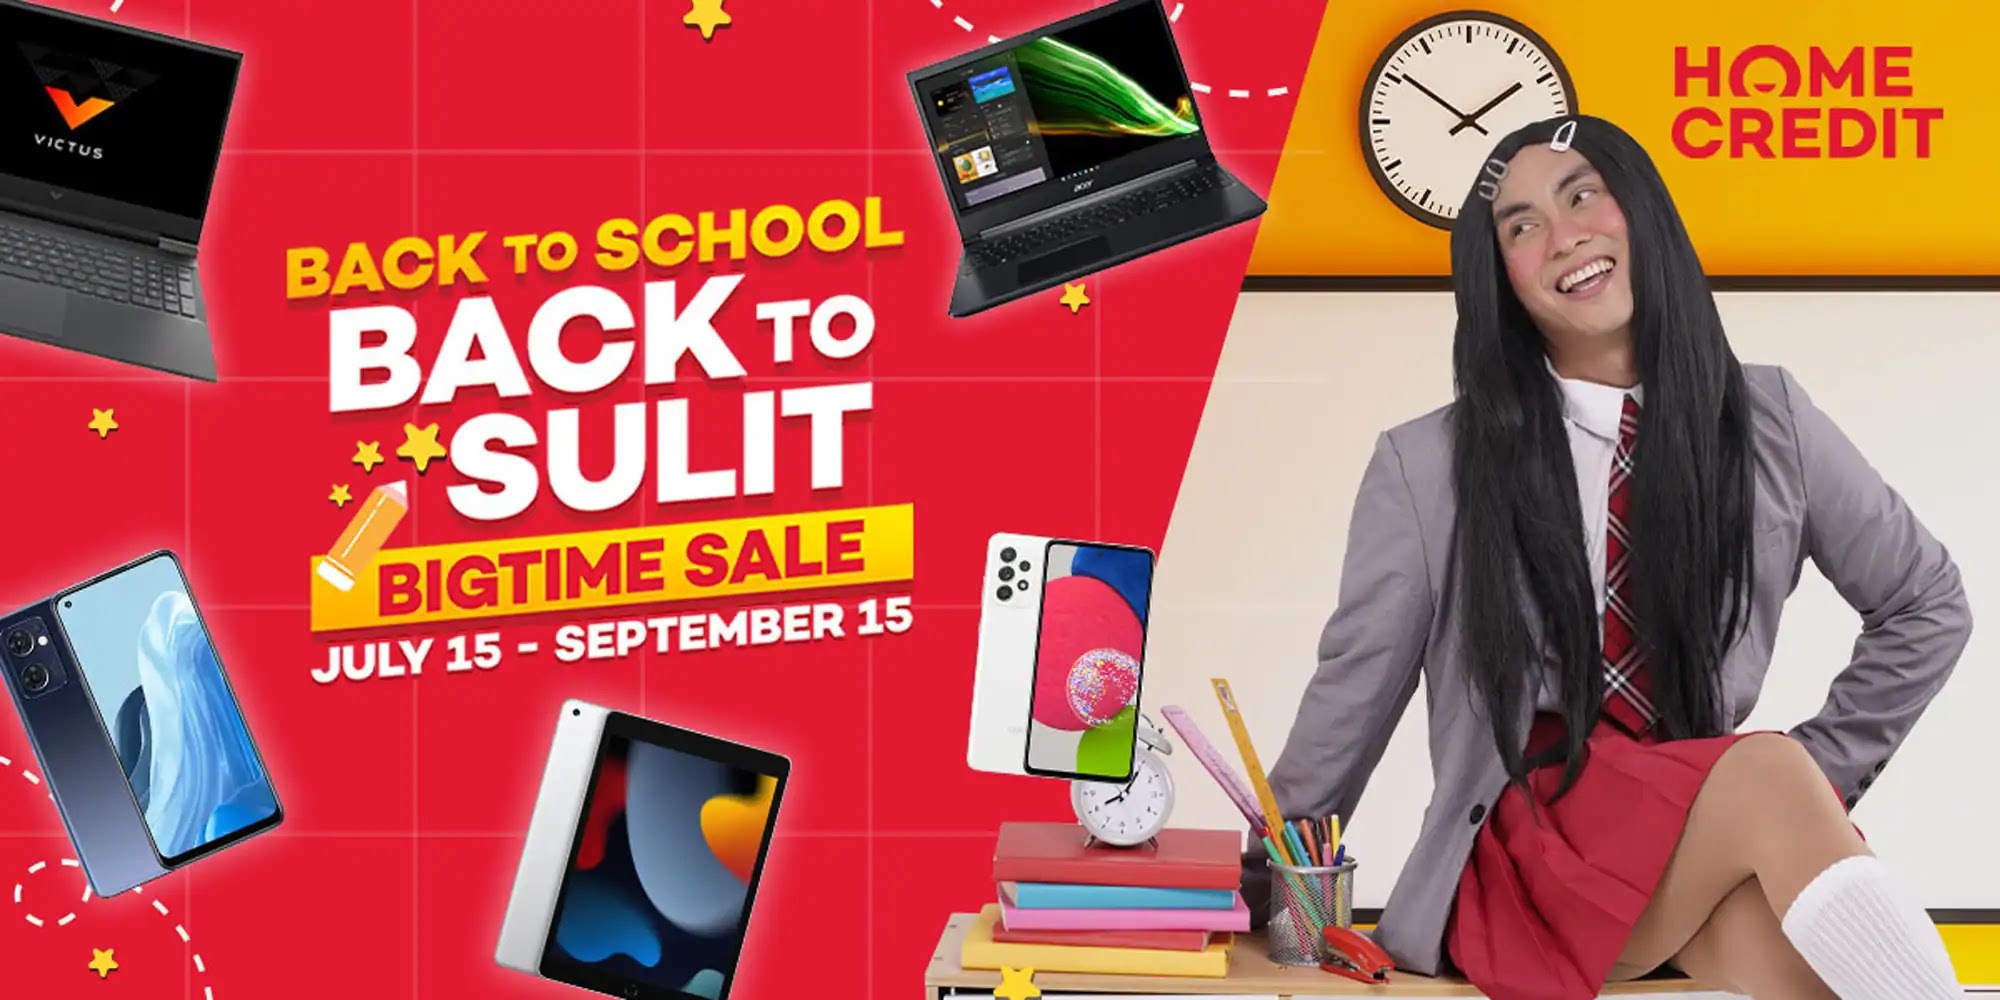 Home Credit’s Back-to-School, Back-to-Sulit campaign